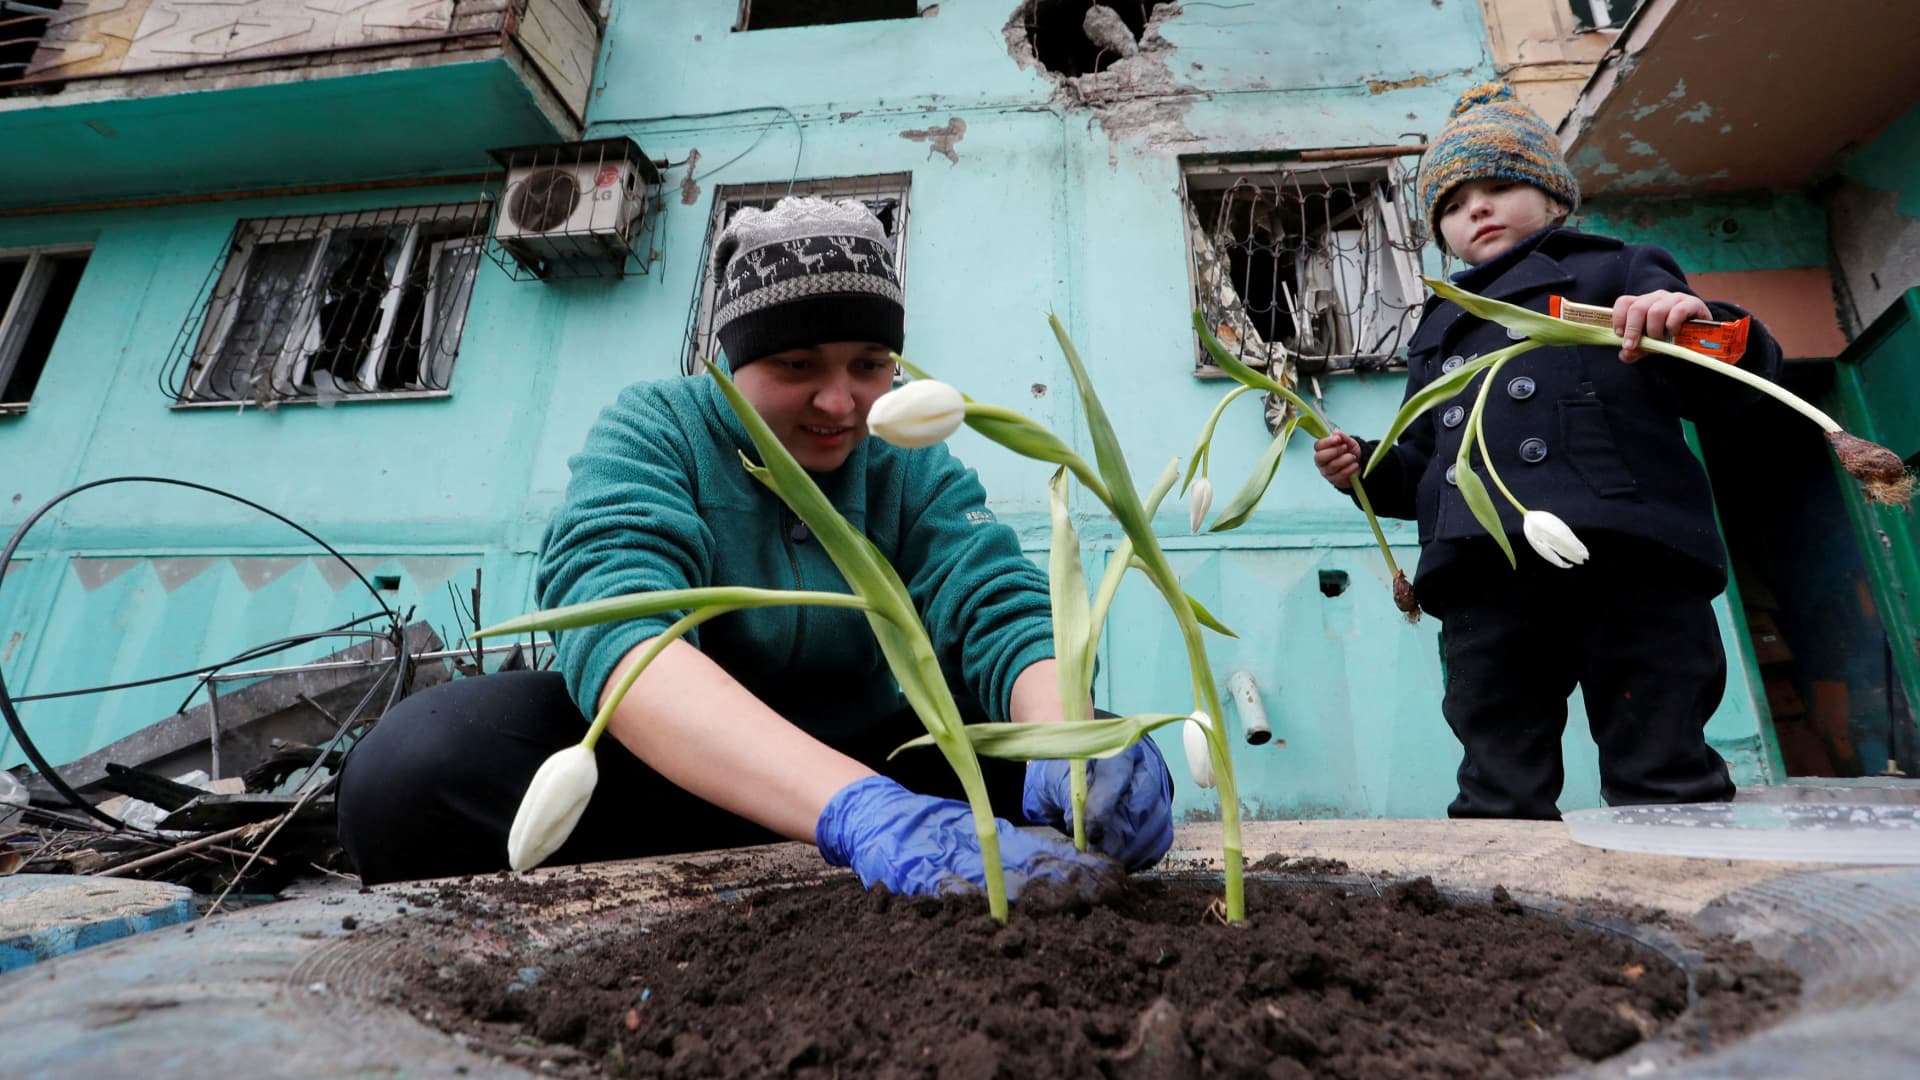 Local resident Viktoria Mukhina, 33, plants tulips with her daughter Miroslava near an apartment building damaged during Ukraine-Russia conflict in the southern port city of Mariupol, Ukraine April 4, 2022.